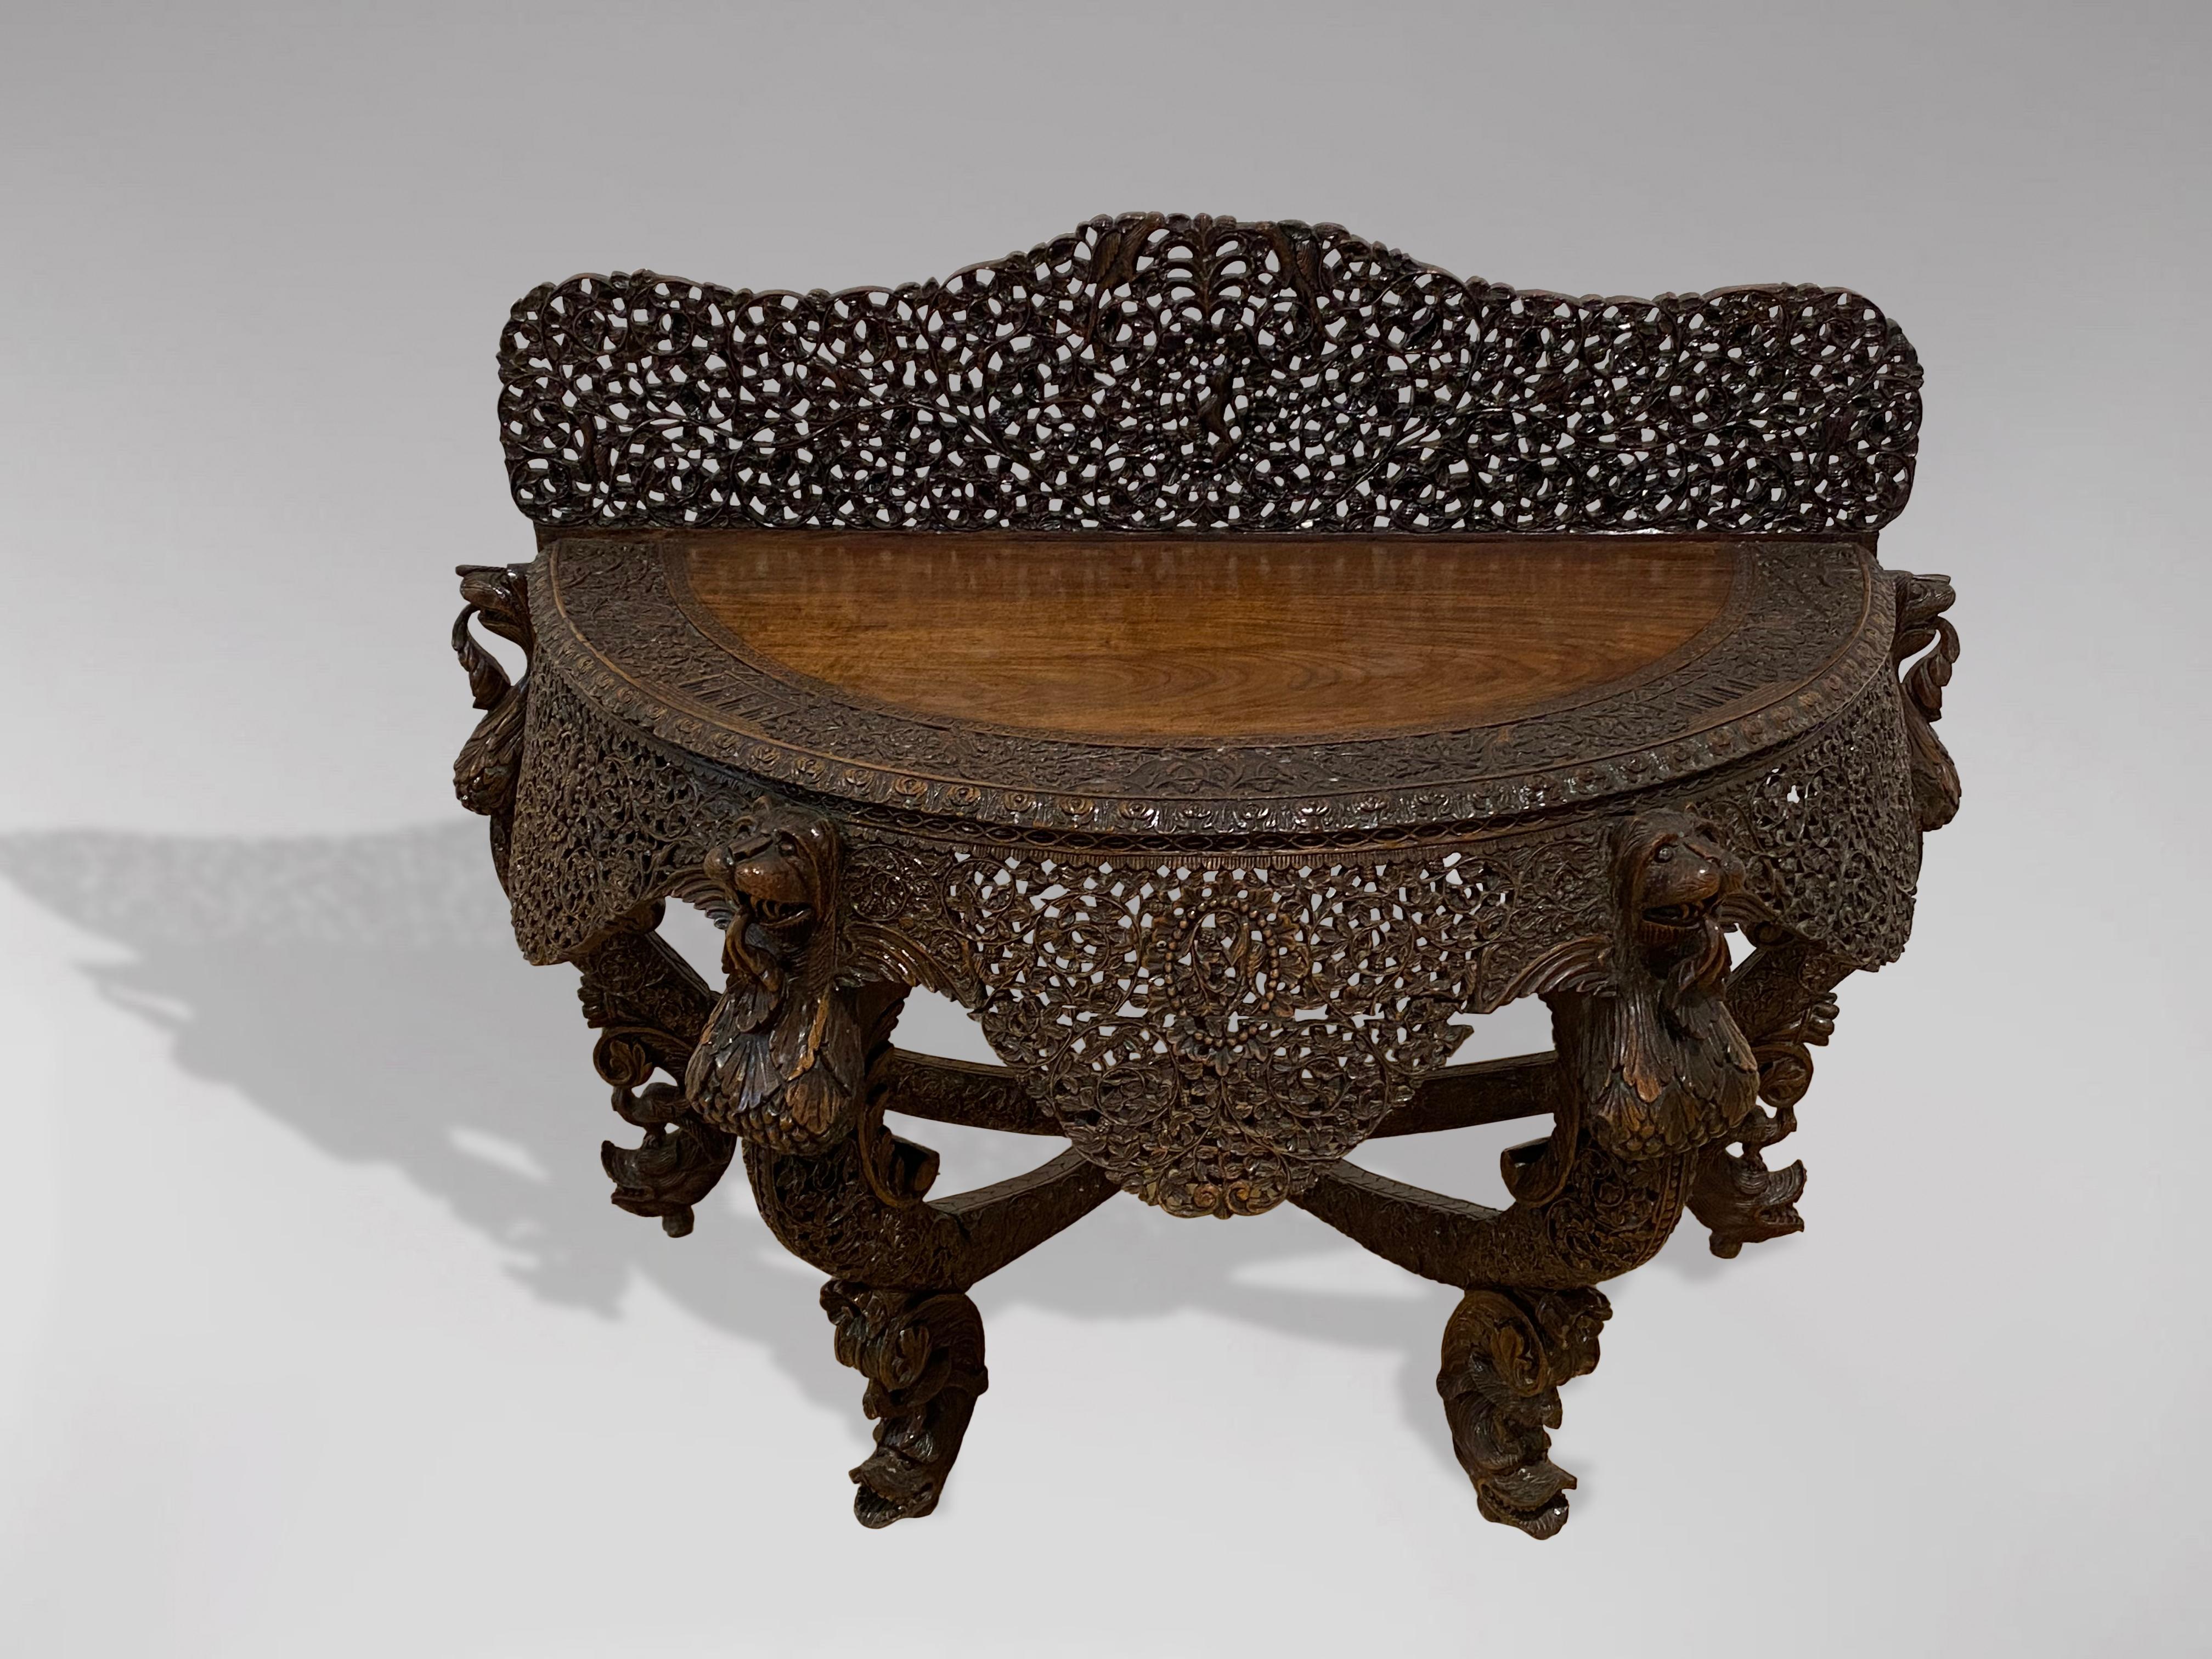 A mid 19th century beautiful and highly decorative British colonial rosewood console table supported by four profusely carved legs terminating into mythical animal faces at the table top. The top consists of a fine figured piece of rosewood and a